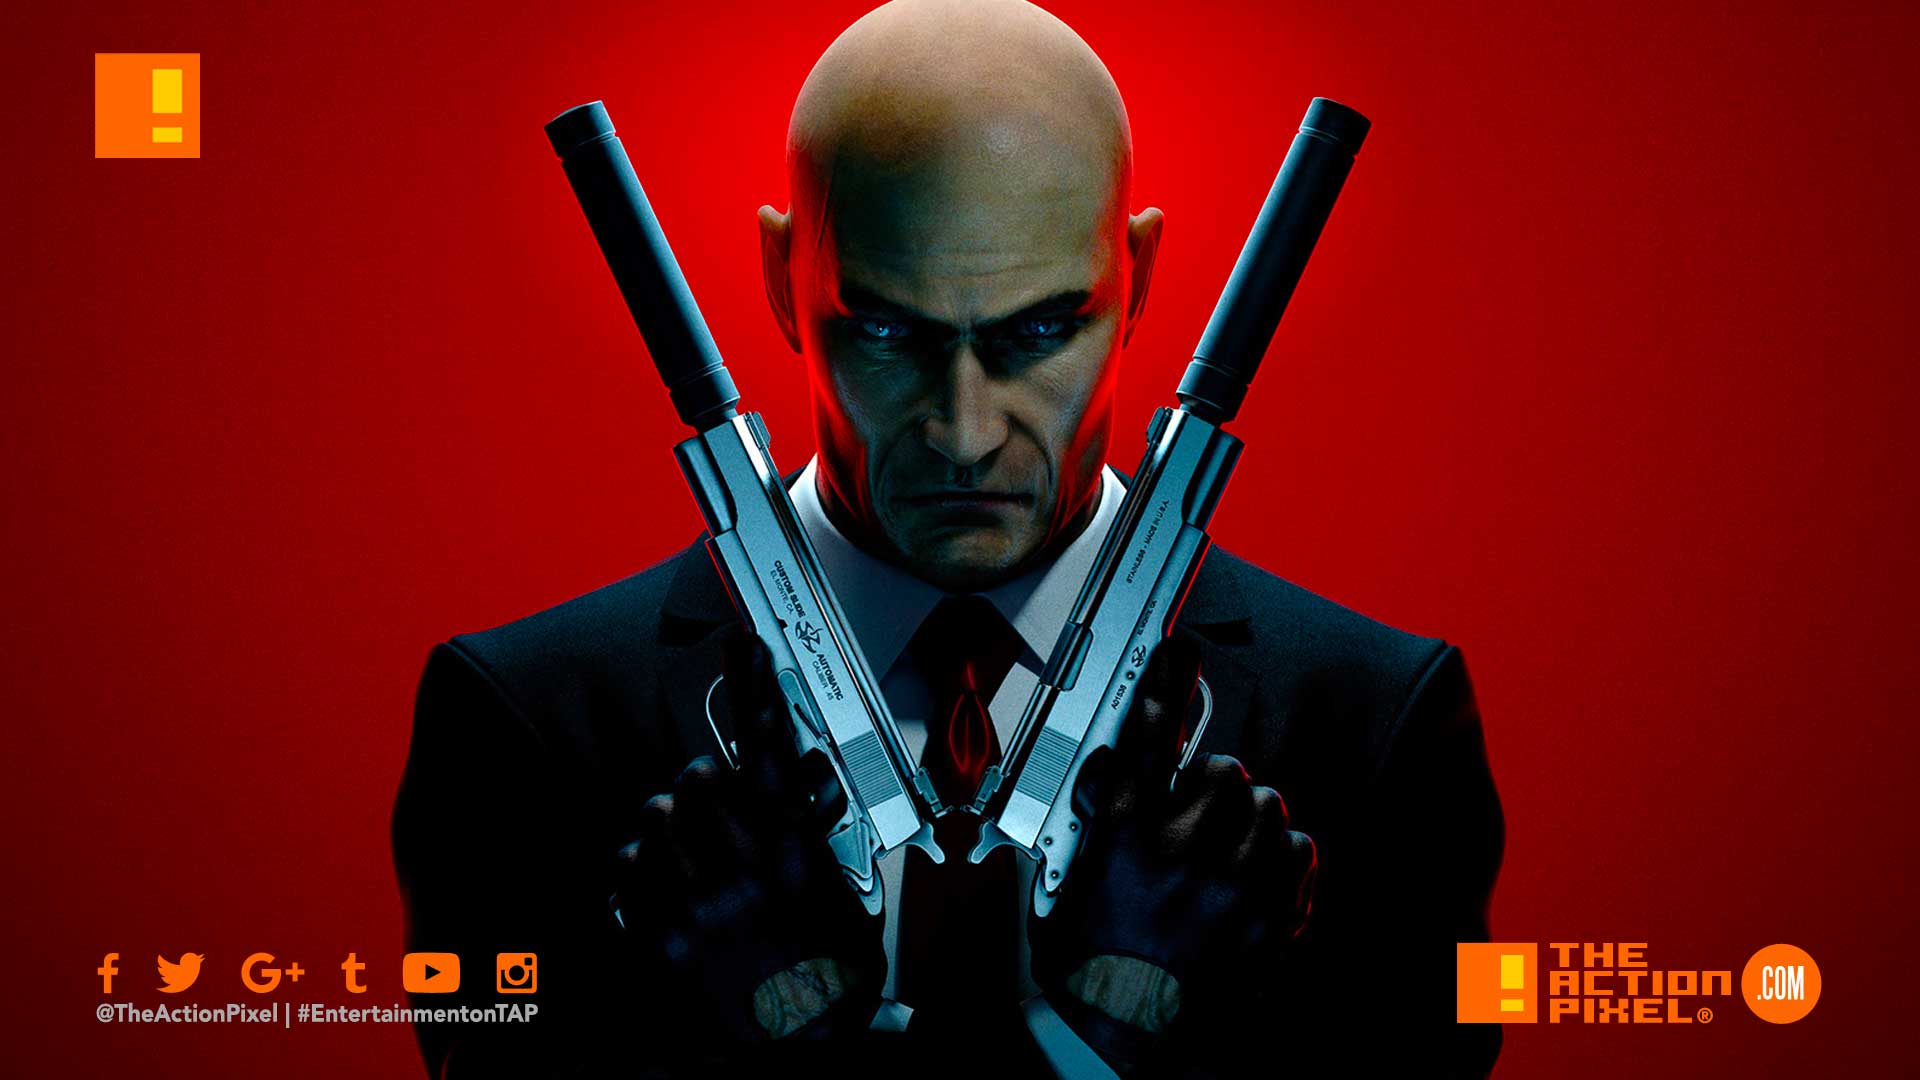 hitman: absolution, hitman: blood money, blood money, remastered, absolution , agent 47, hitman, hd collection, 4k, warner bros. games, io interactive, the action pixel, entertainment on tap